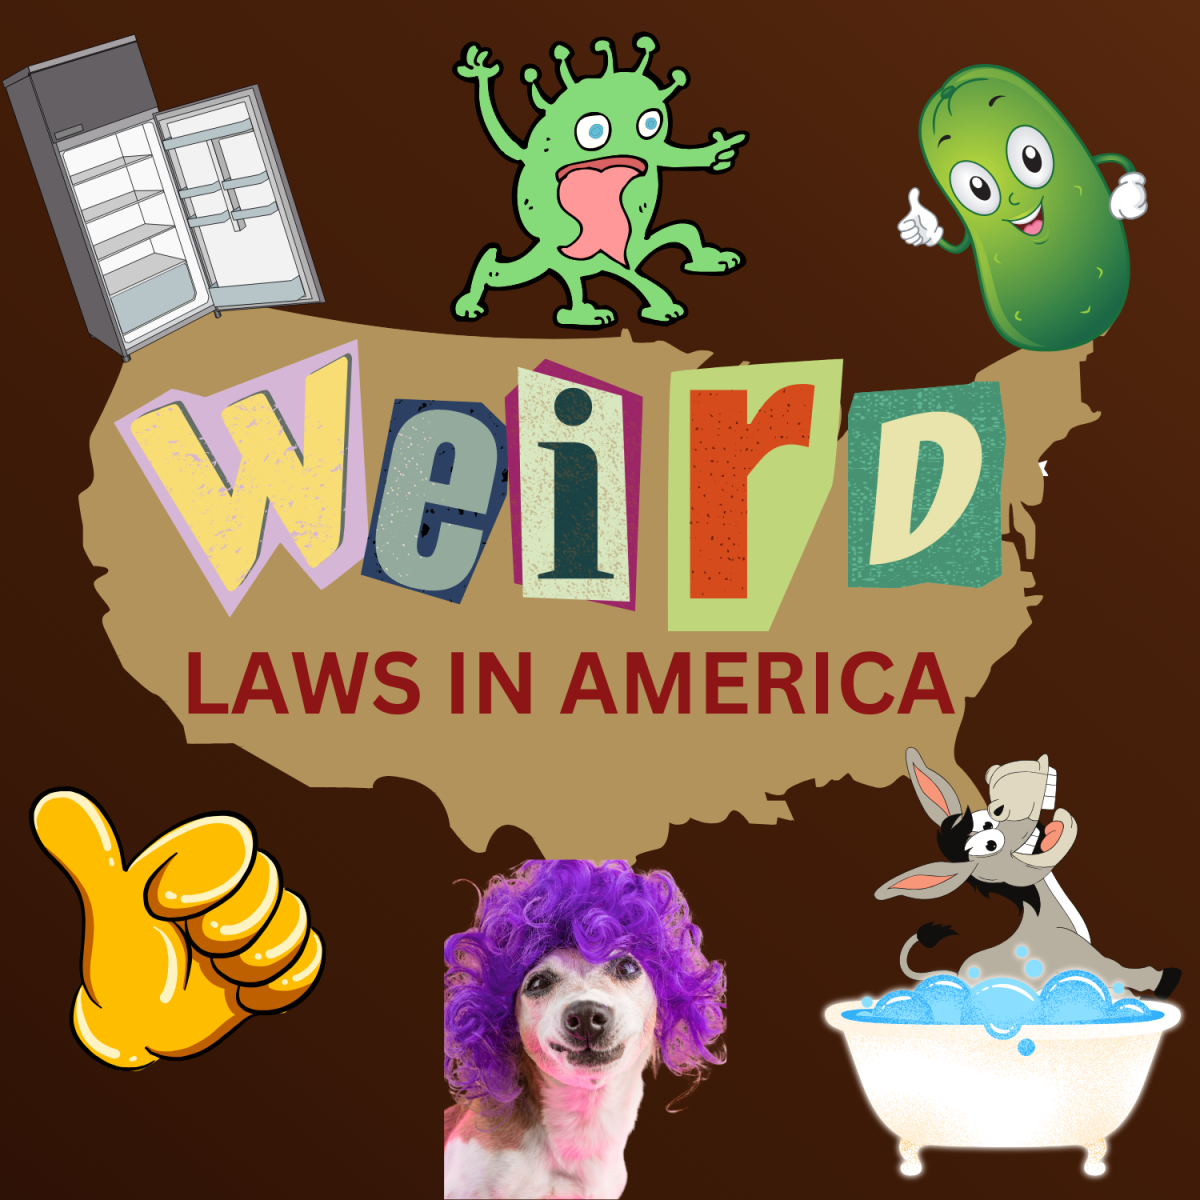 Weird+Laws+in+America